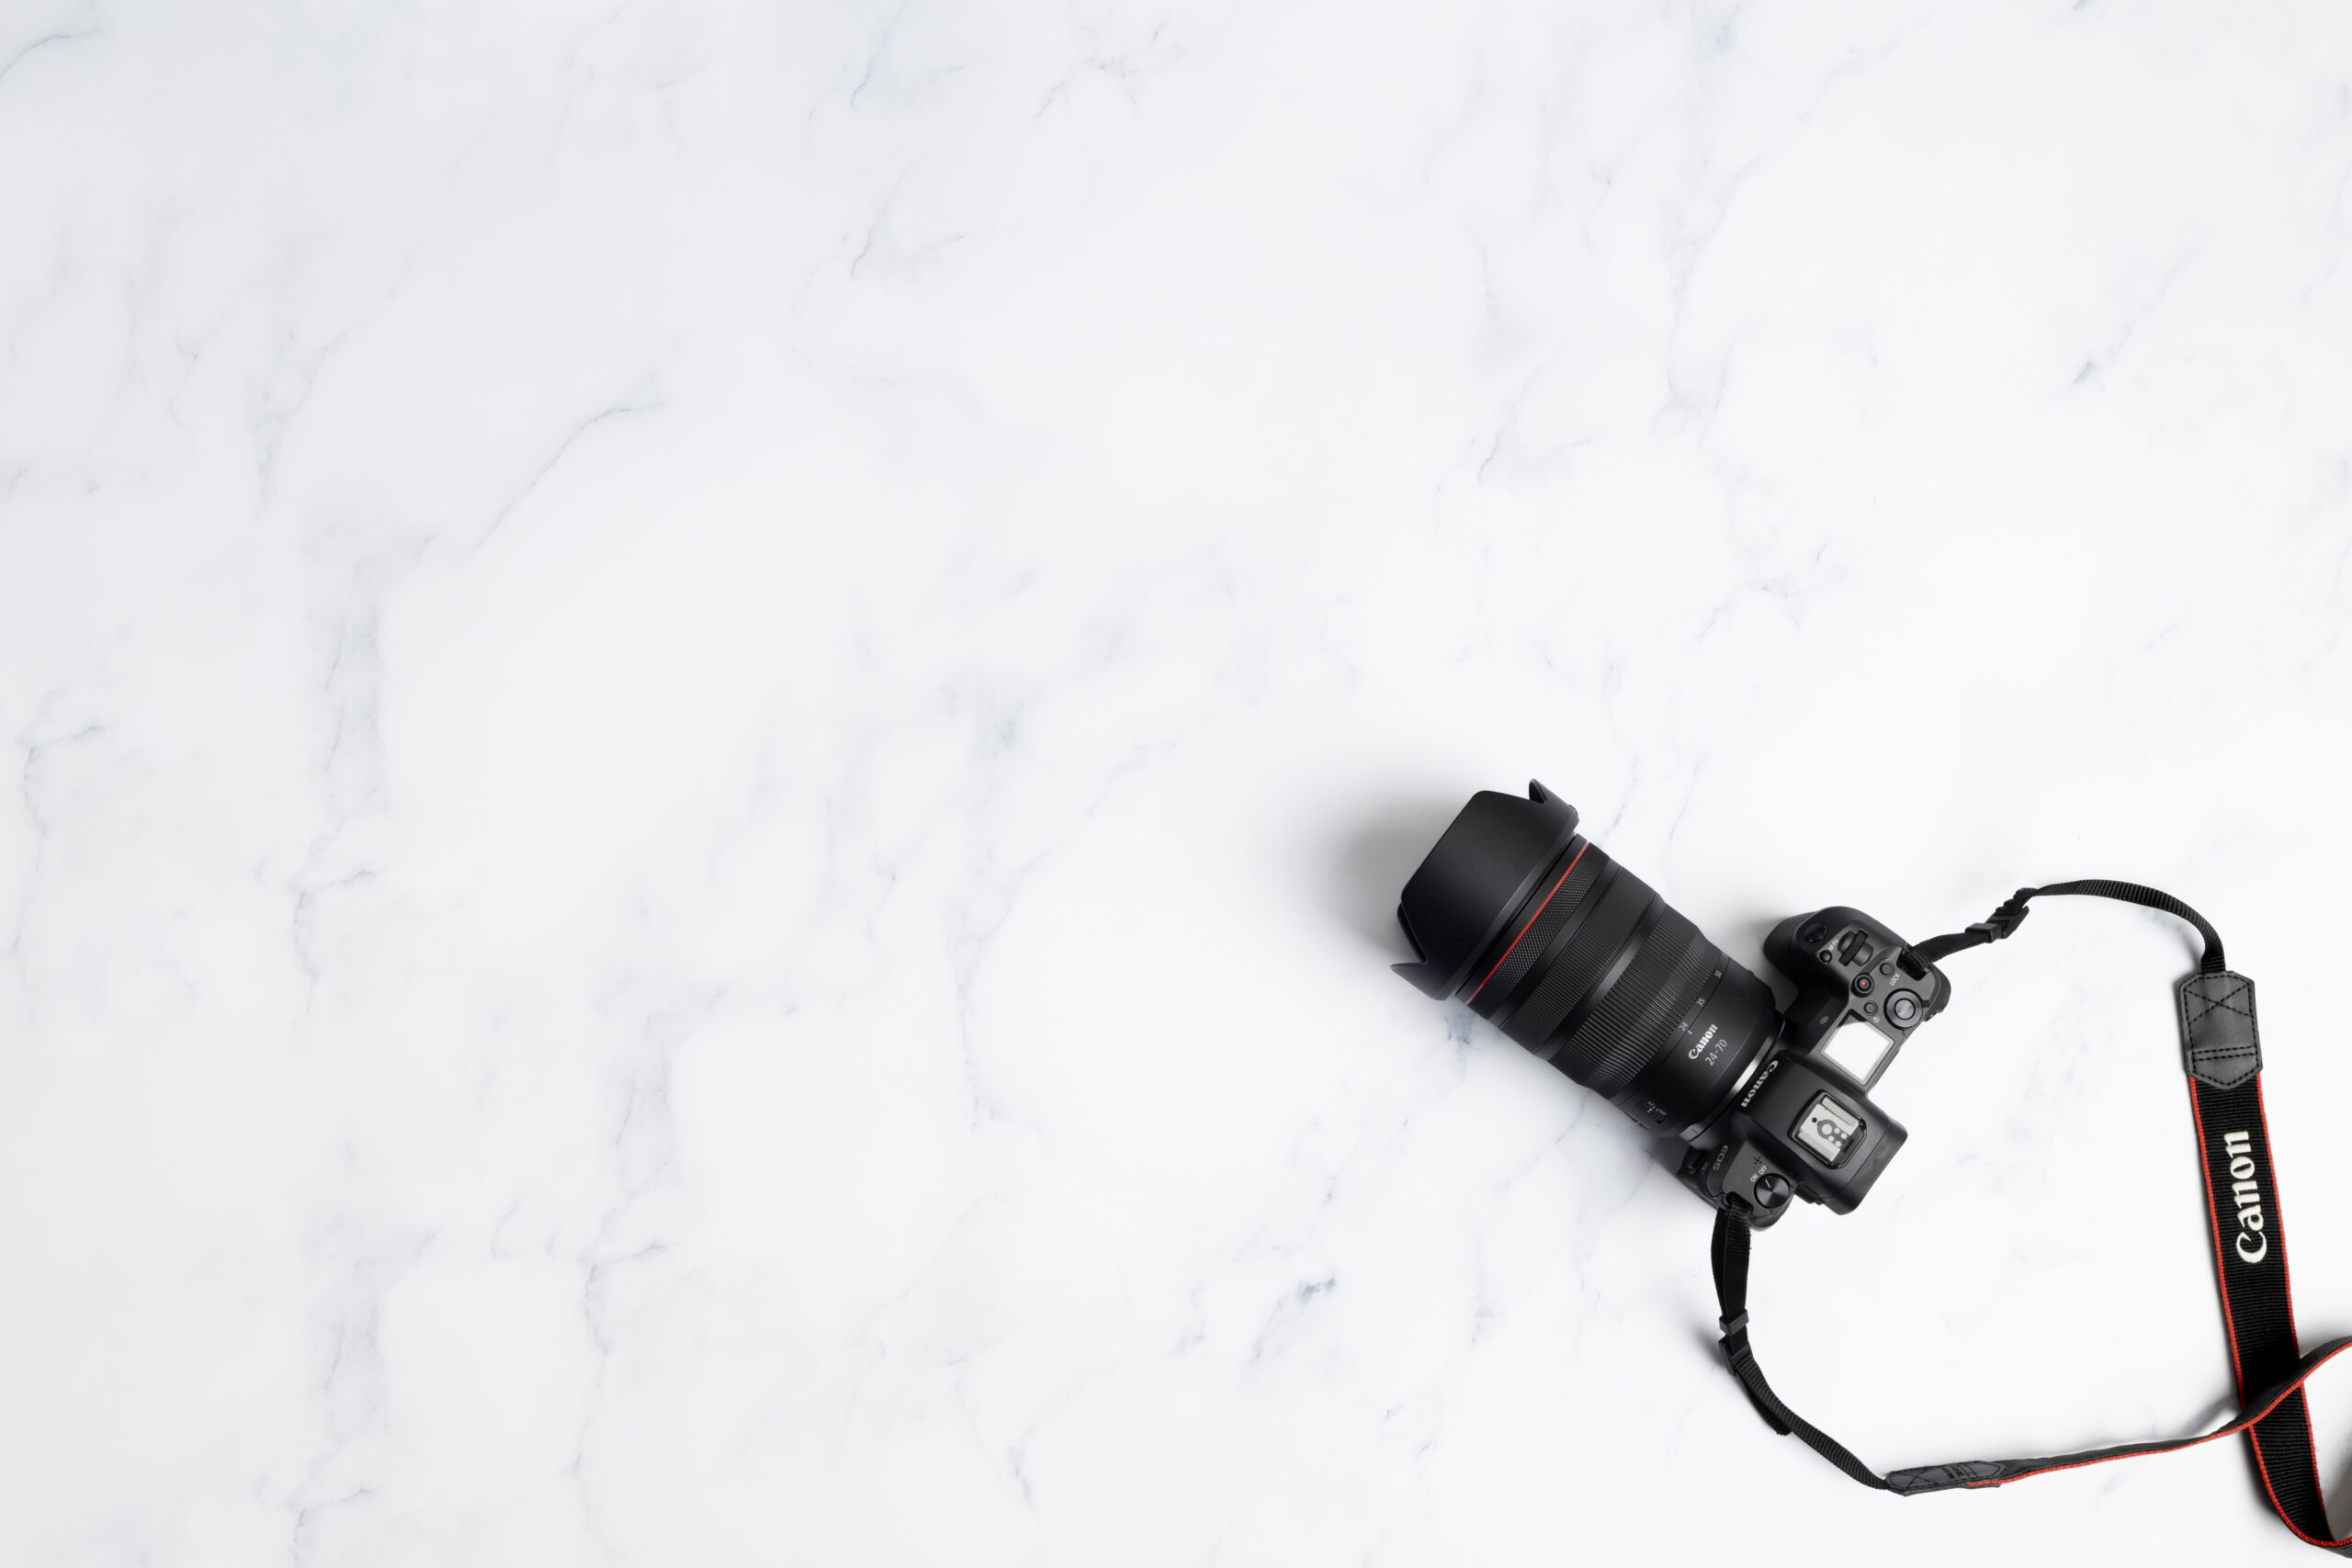 A professional dslr camera equipped with a large lens, resting on a sleek white marble surface with plenty of copy space.